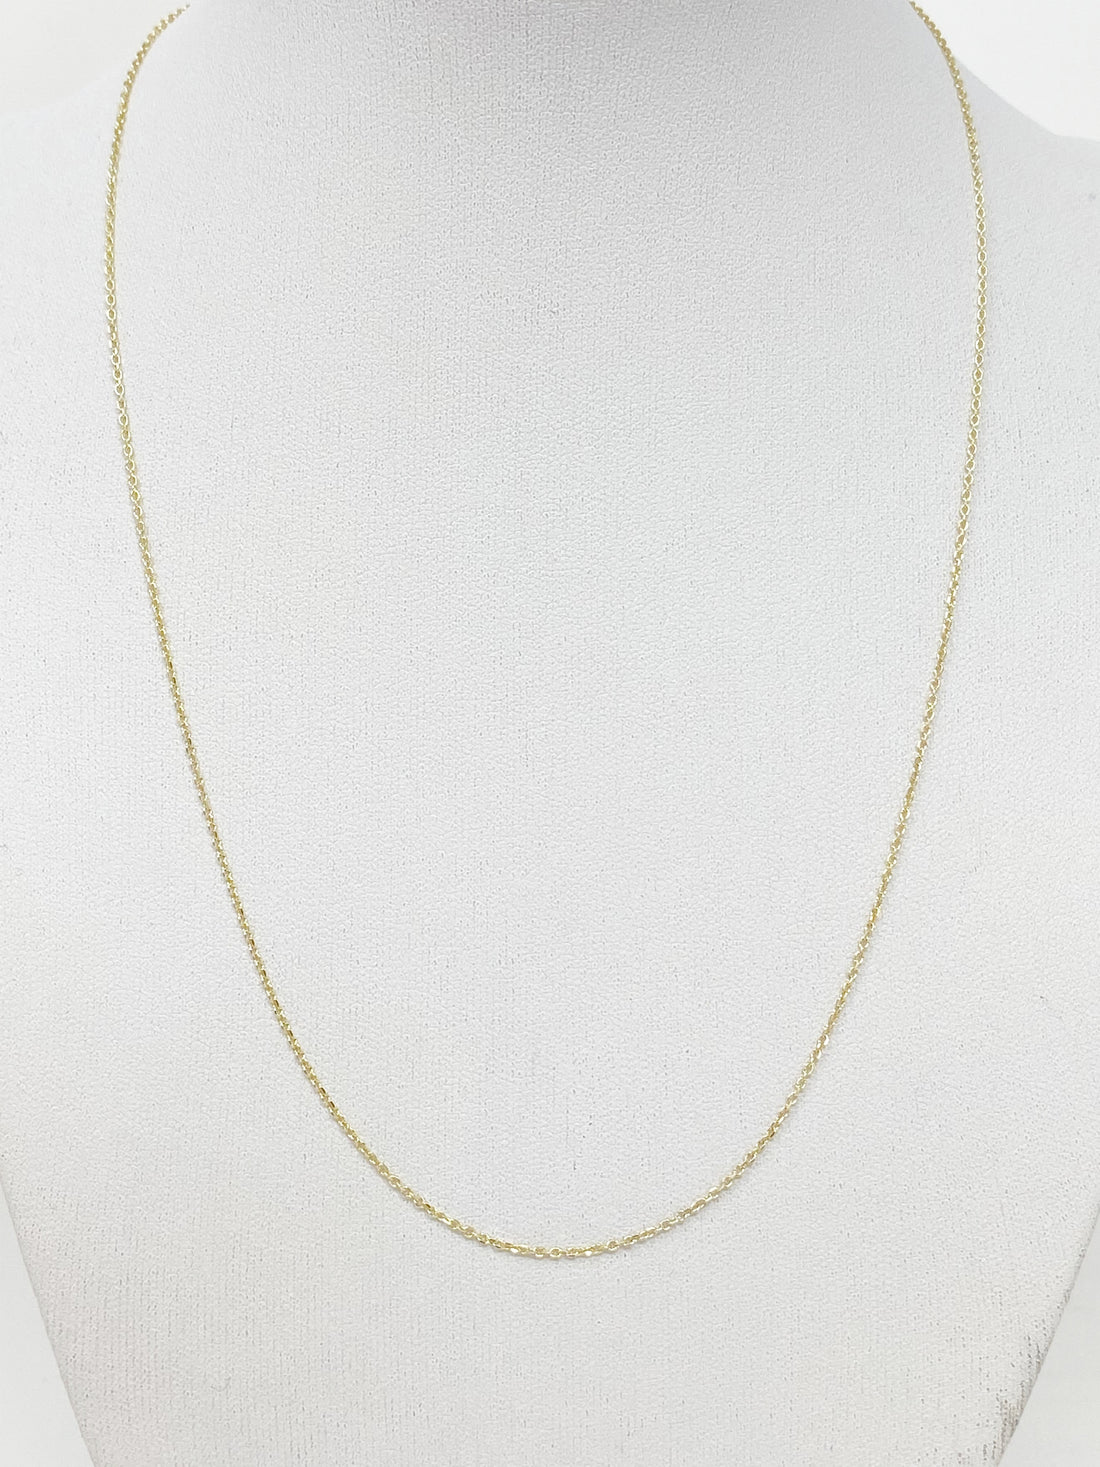 Charming 16” Delicate Chain in Gold